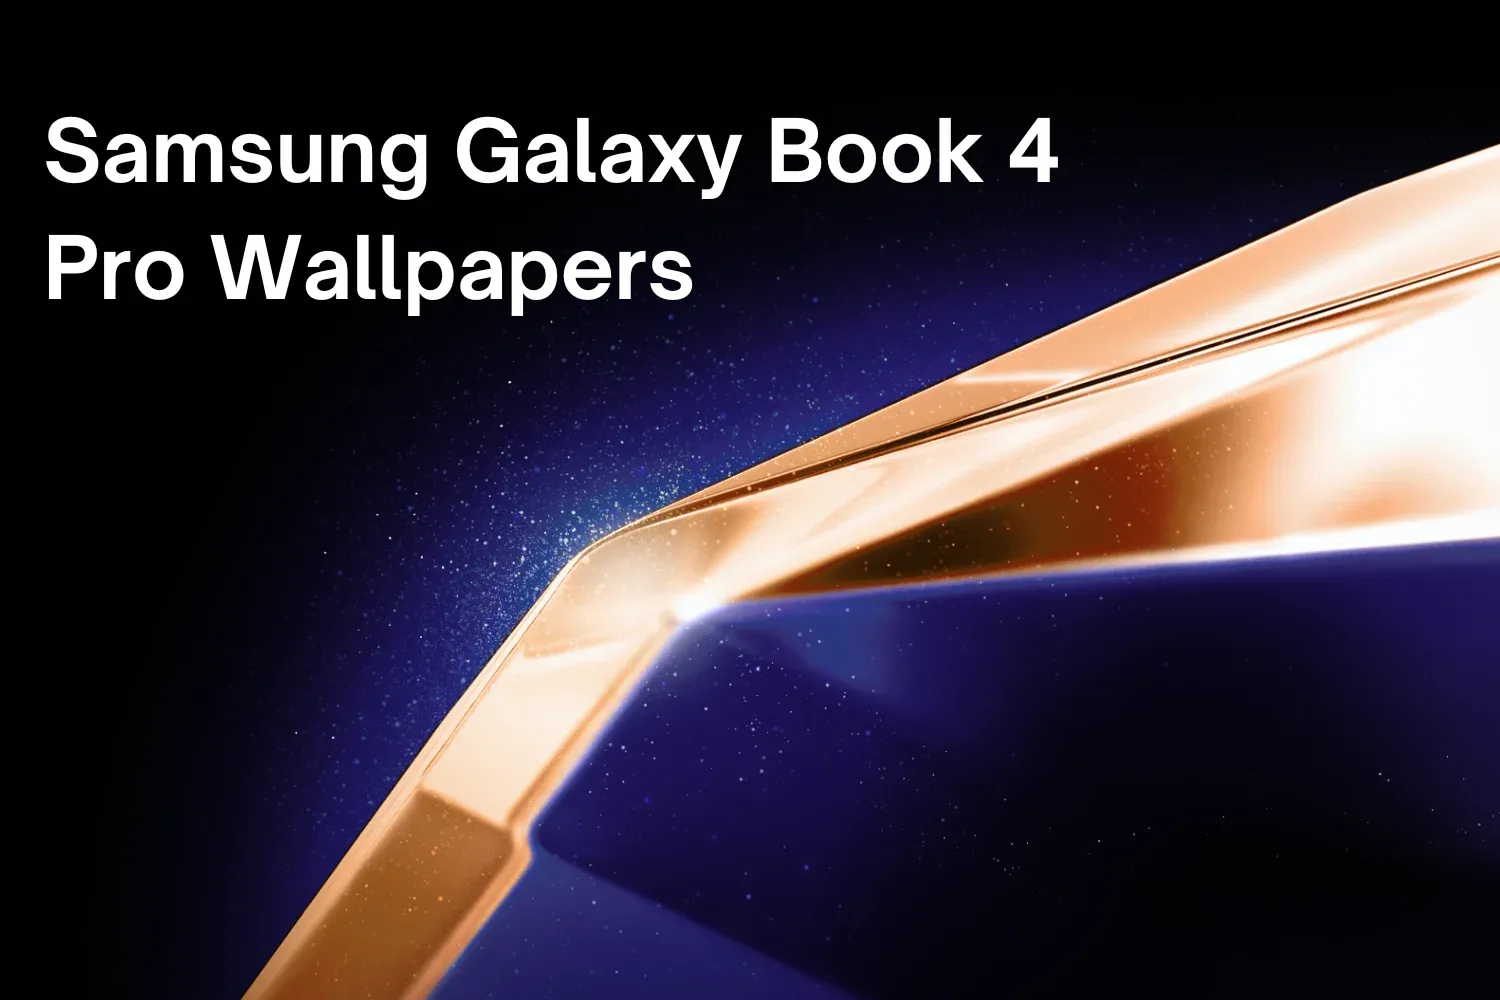 Download Samsung Galaxy Book 4 Pro Wallpapers in QHD